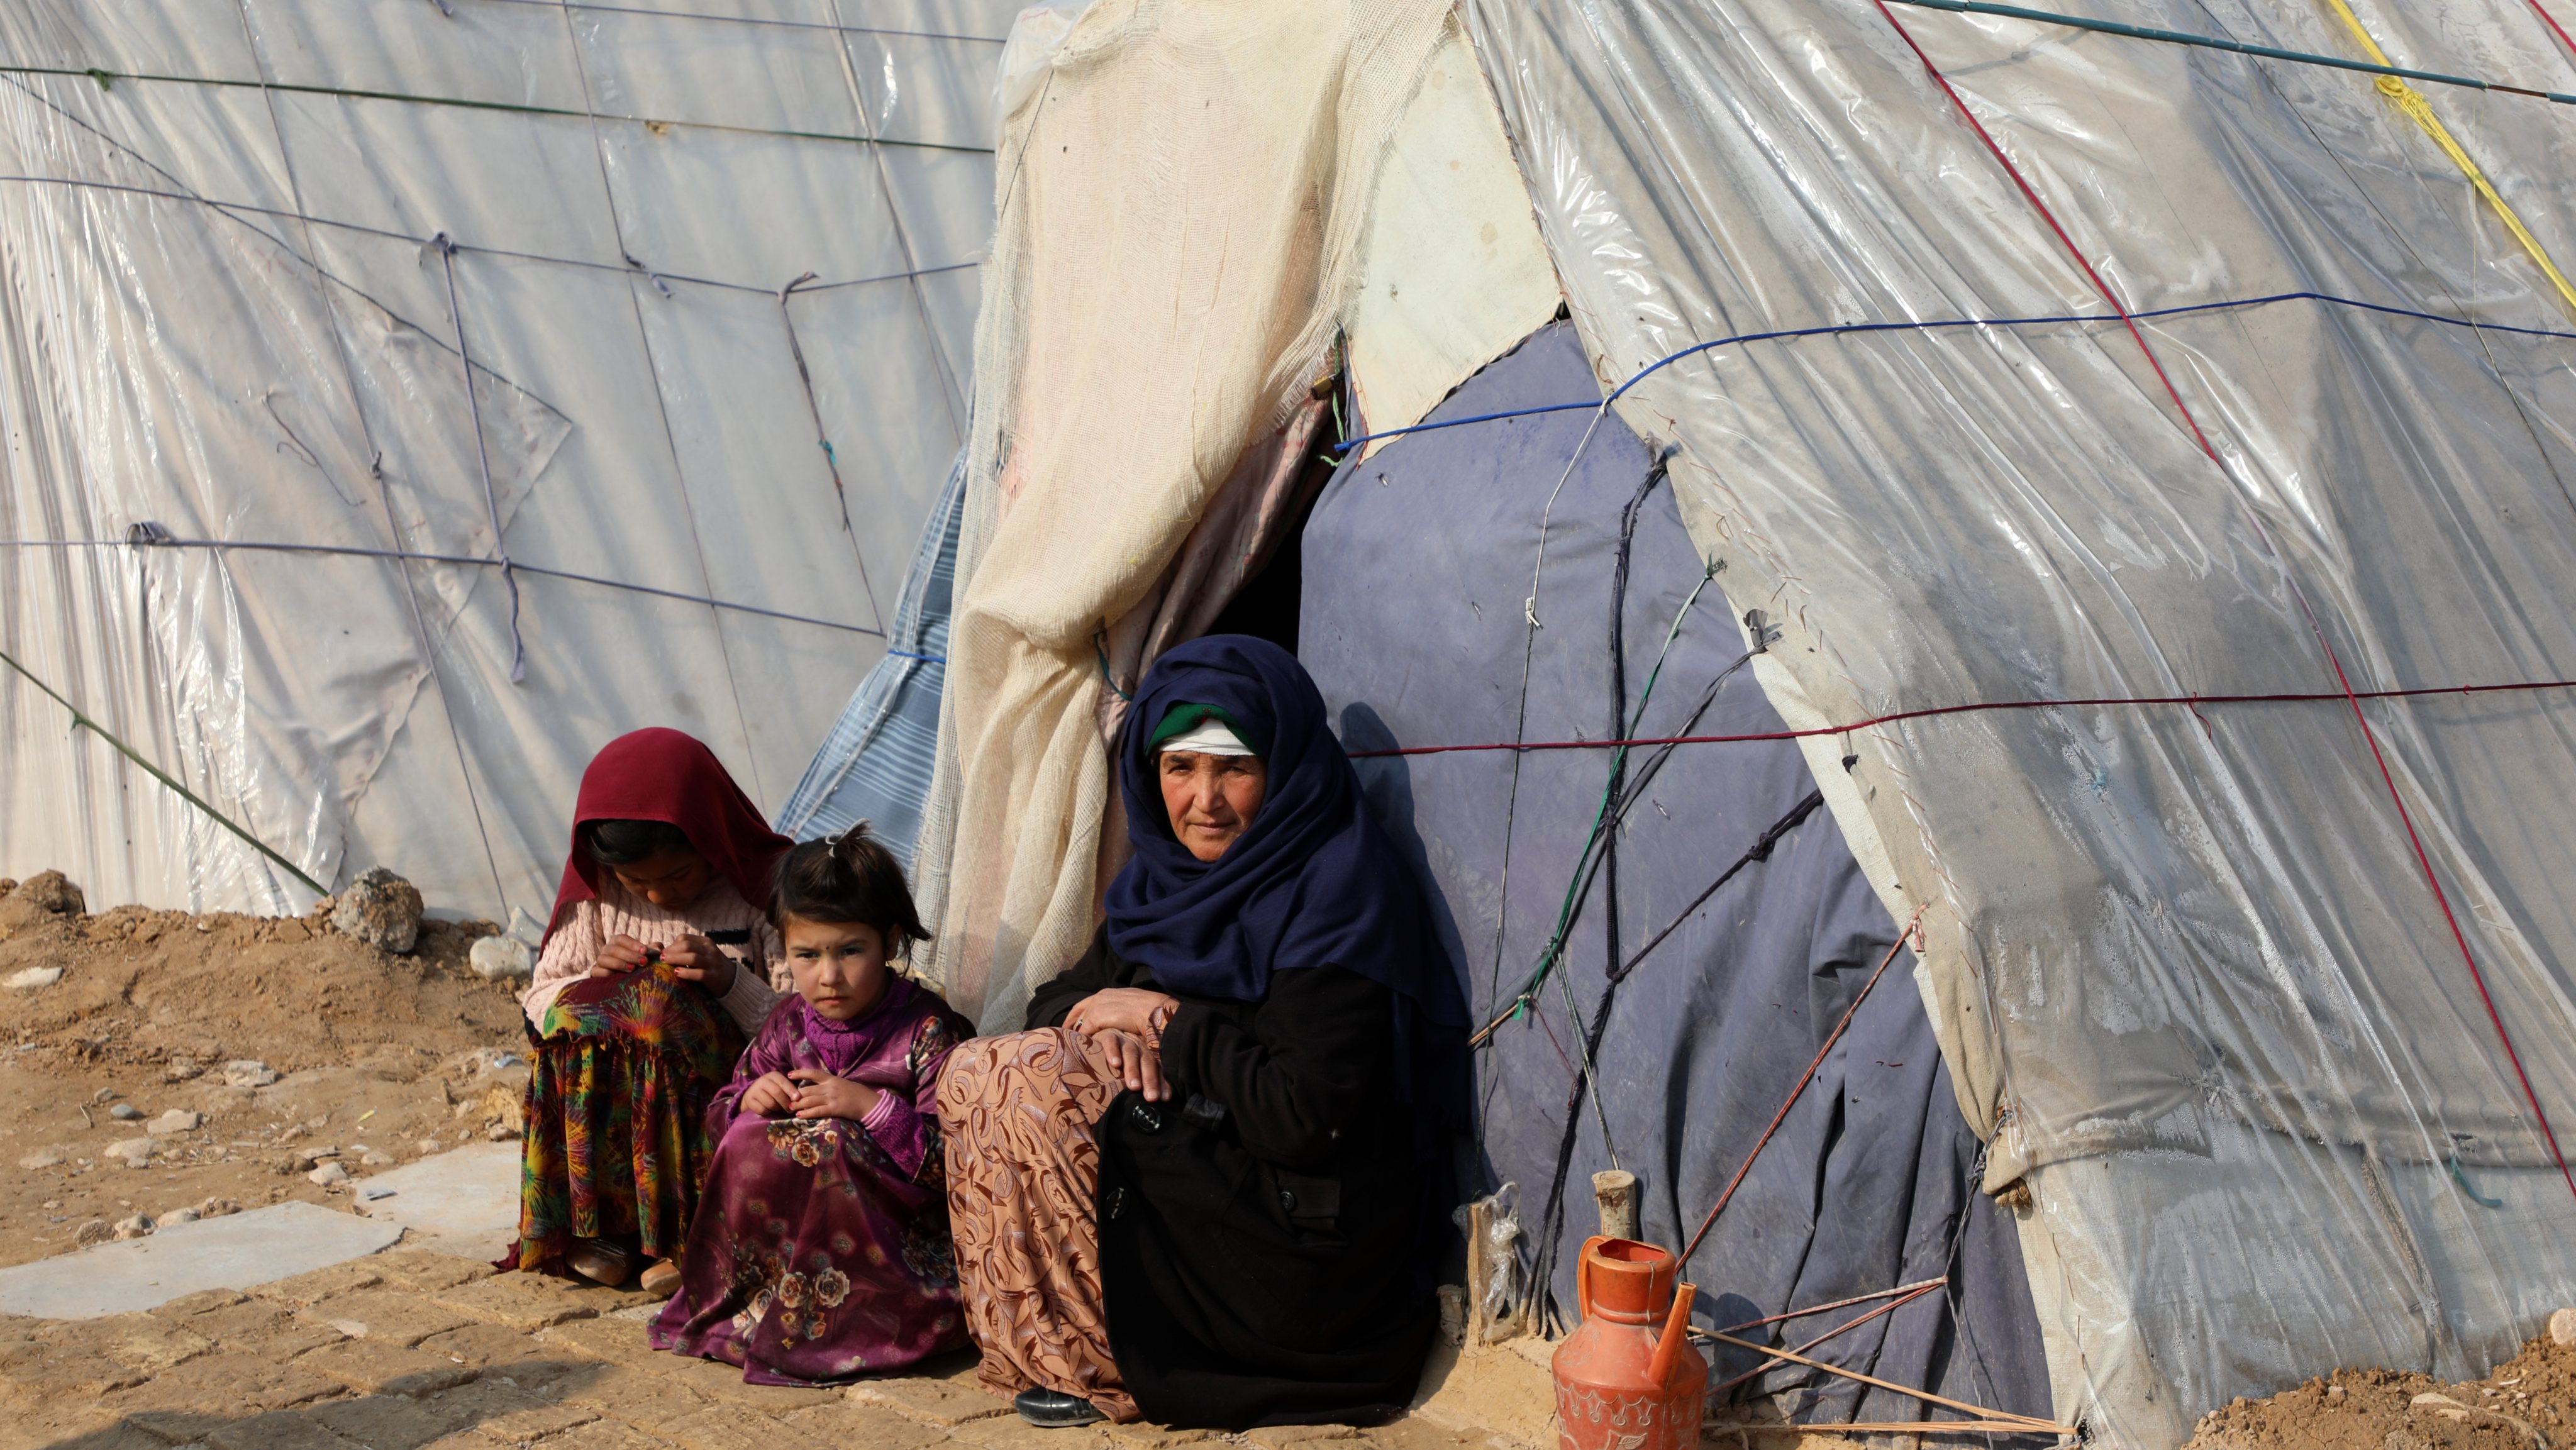 Hunger and poverty in Afghanistan affect displaced families